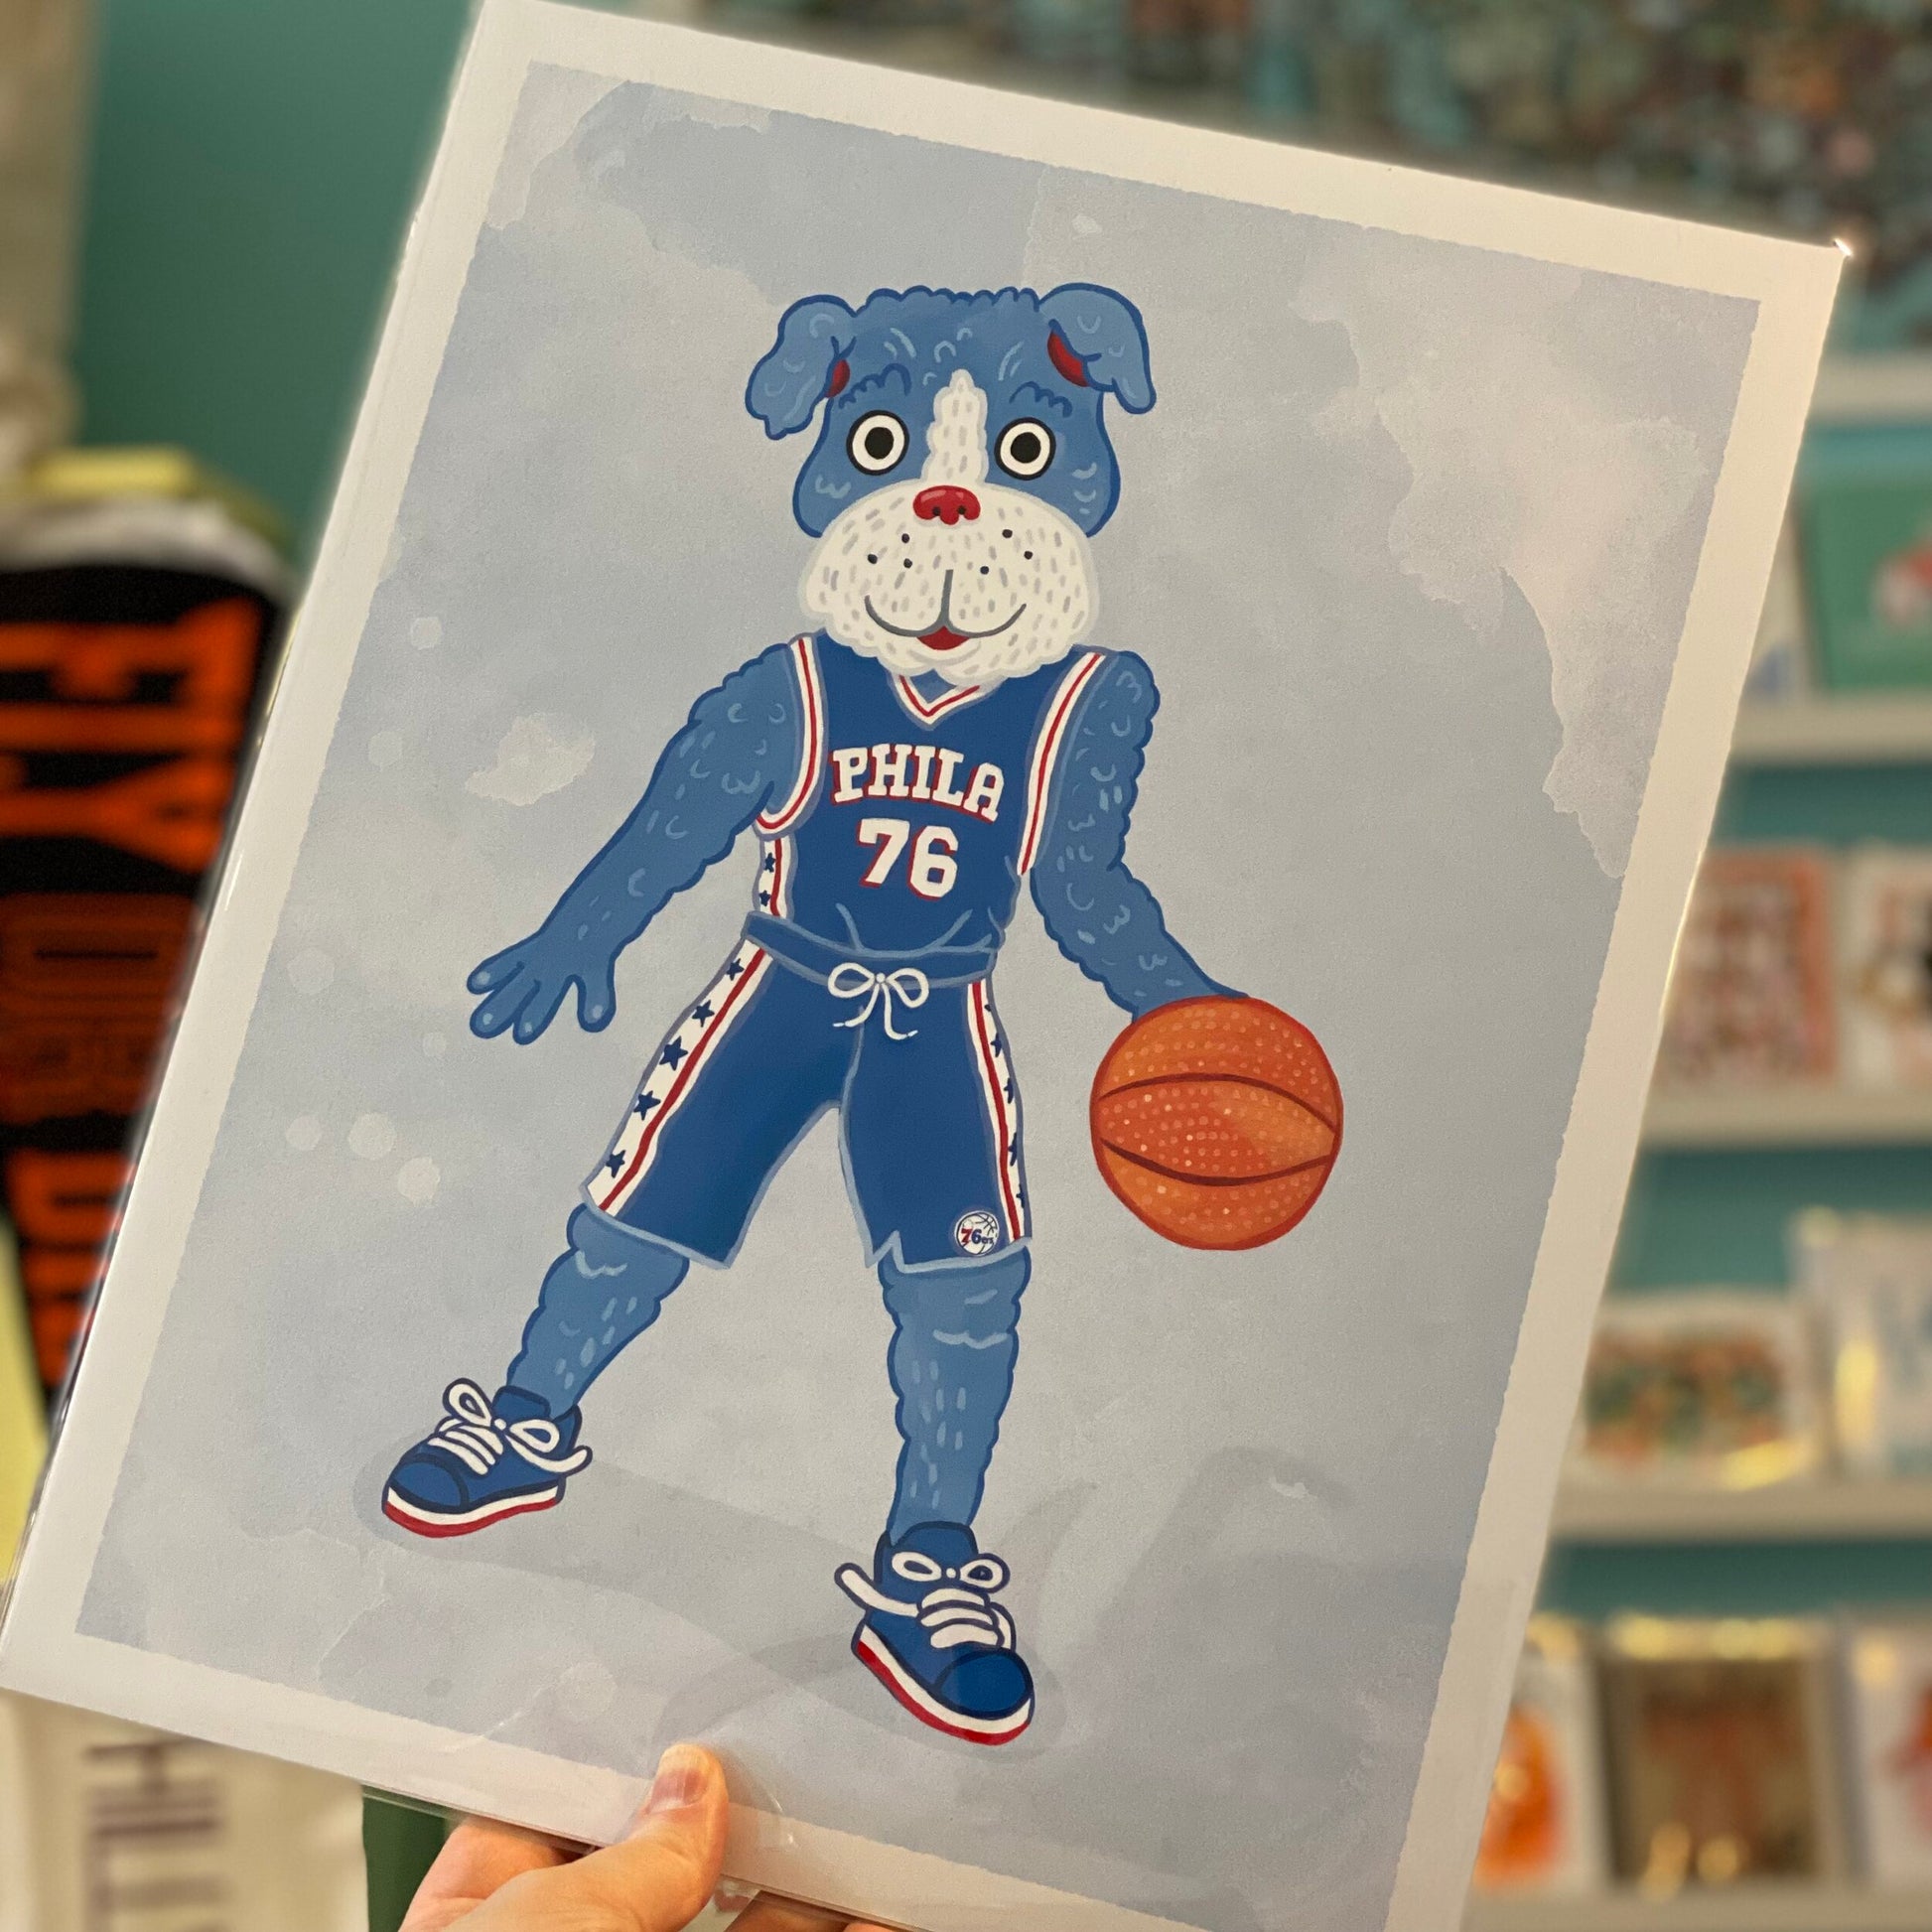 An archival digital print of a cartoon dog dressed in a basketball uniform with the number 76, holding a basketball from Jamie Bendas' Philly Mascot Prints.